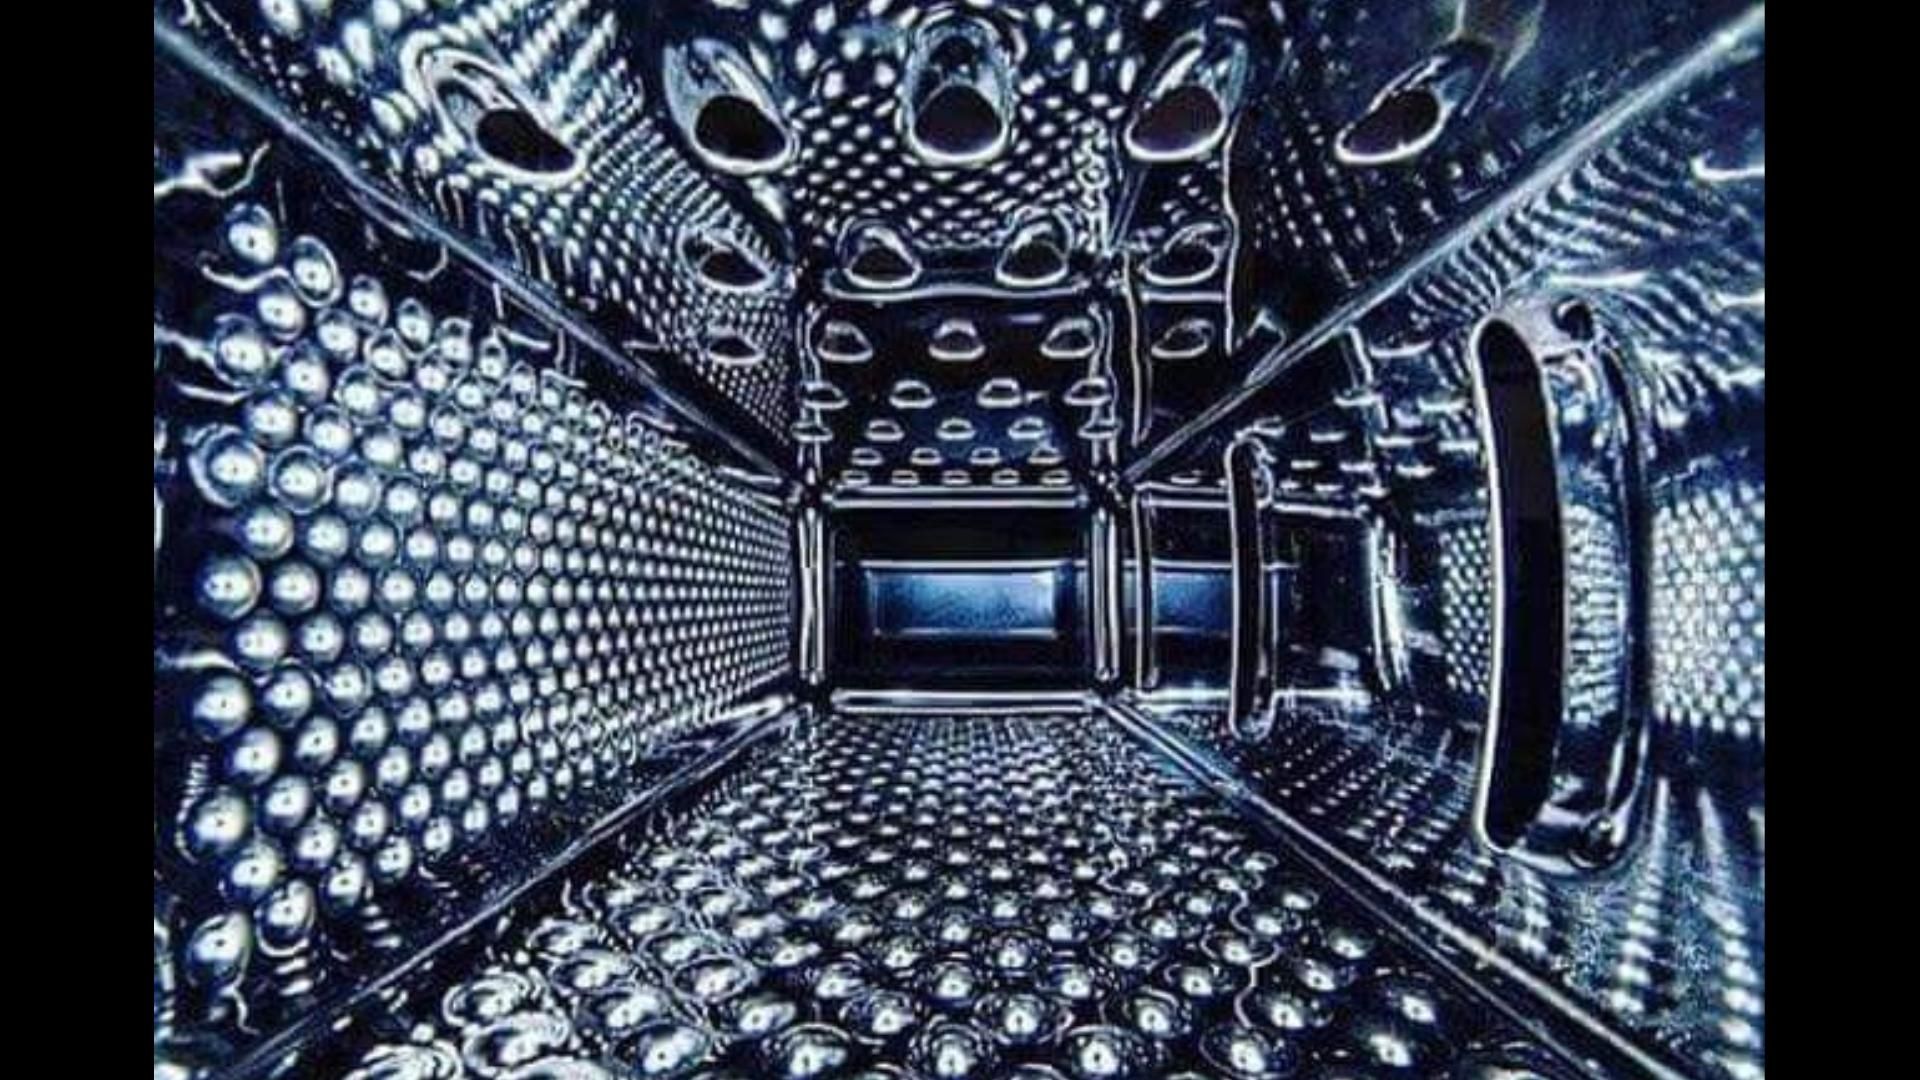 The inside of a cheese grater, or the backdrop for a 2000s rap video?